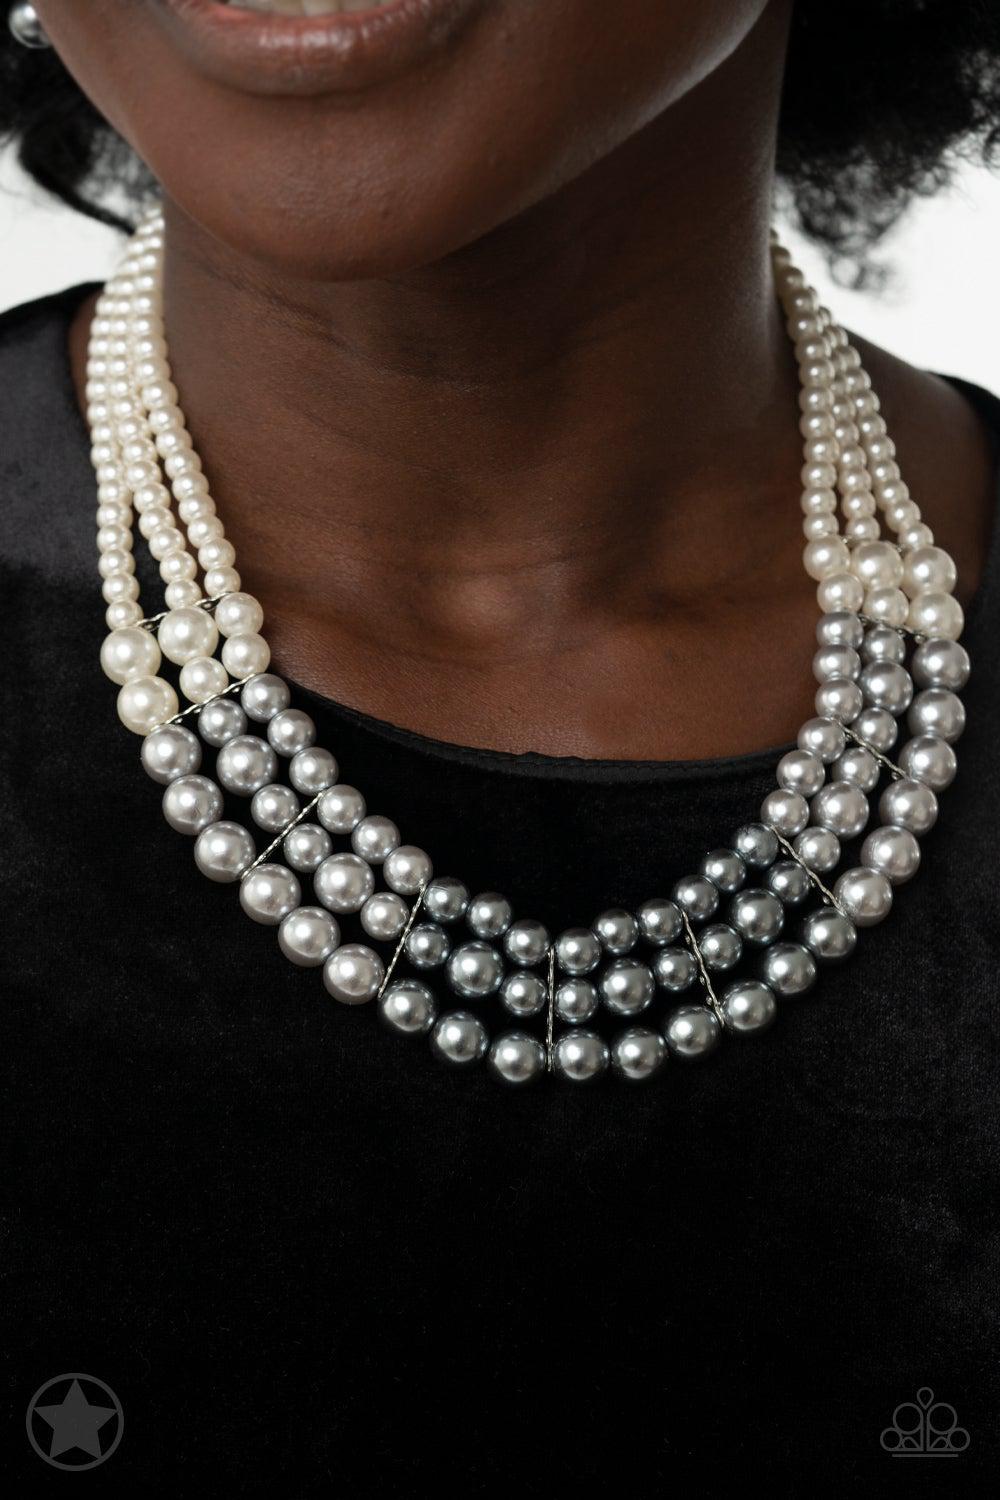 Lady in Waiting White and Silver Pearl Necklace and matching Earrings - Paparazzi Accessories - model -CarasShop.com - $5 Jewelry by Cara Jewels